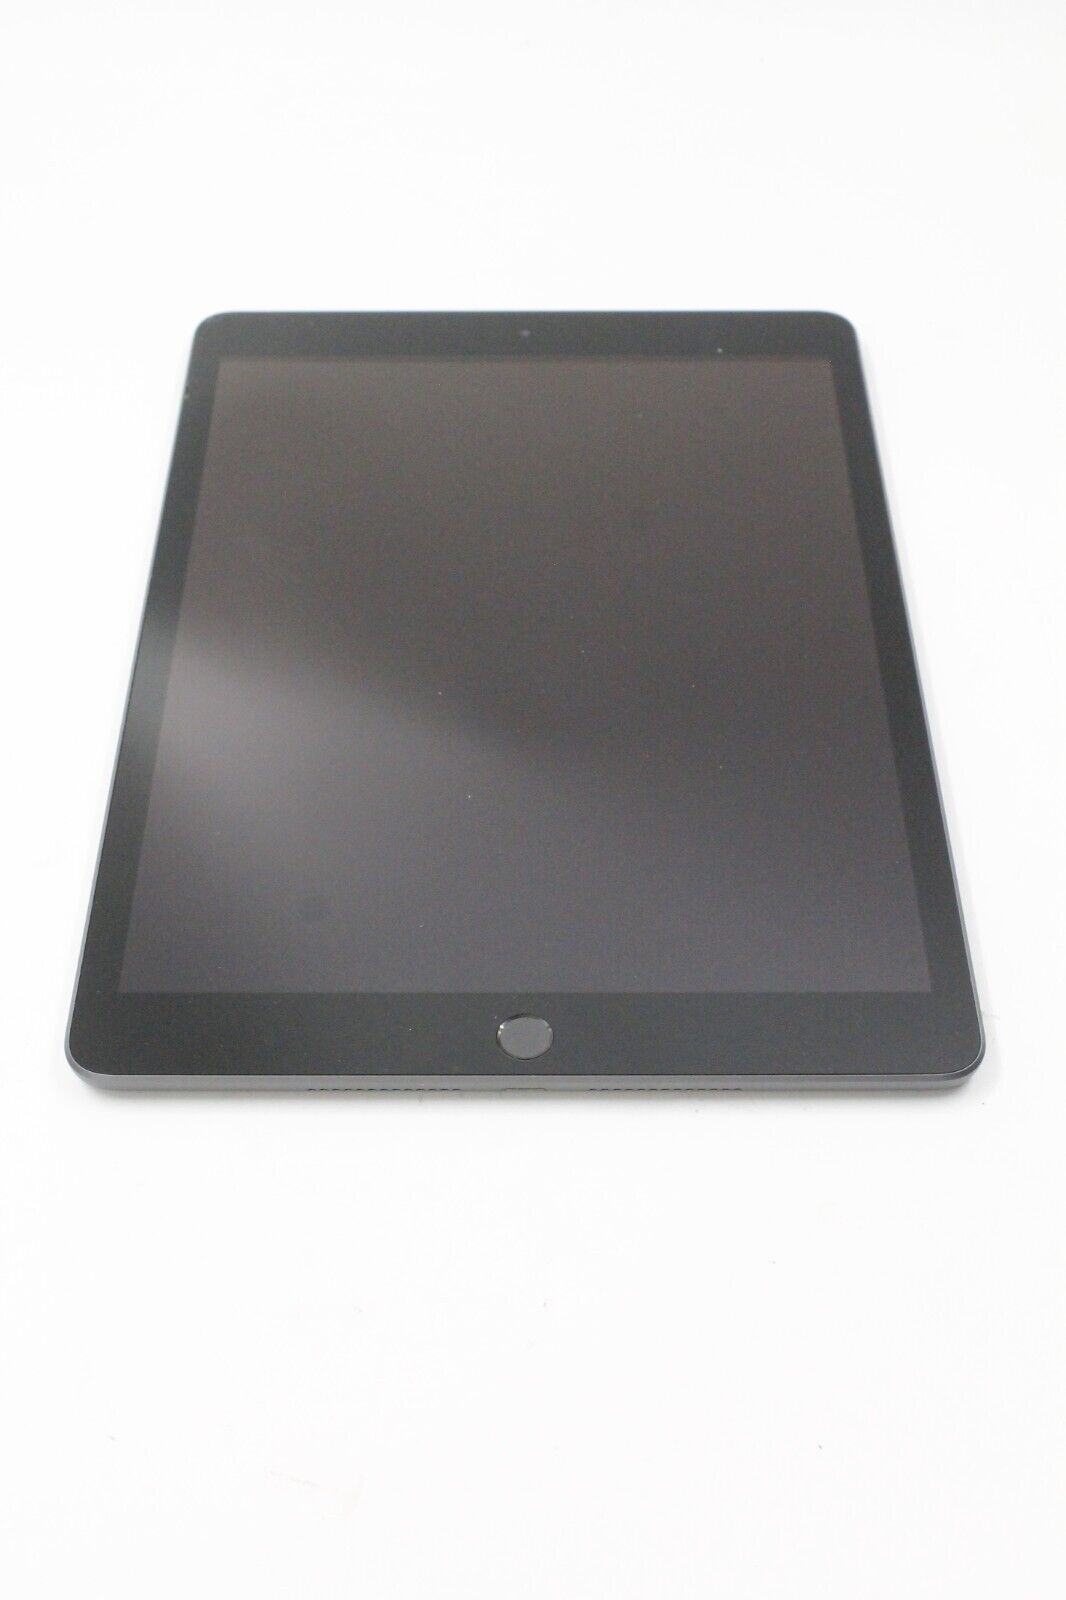 Apple iPad 7th Gen 128GB, 10.2 in A2197 Space Gray MW772LL/A USED BODY ISSUE